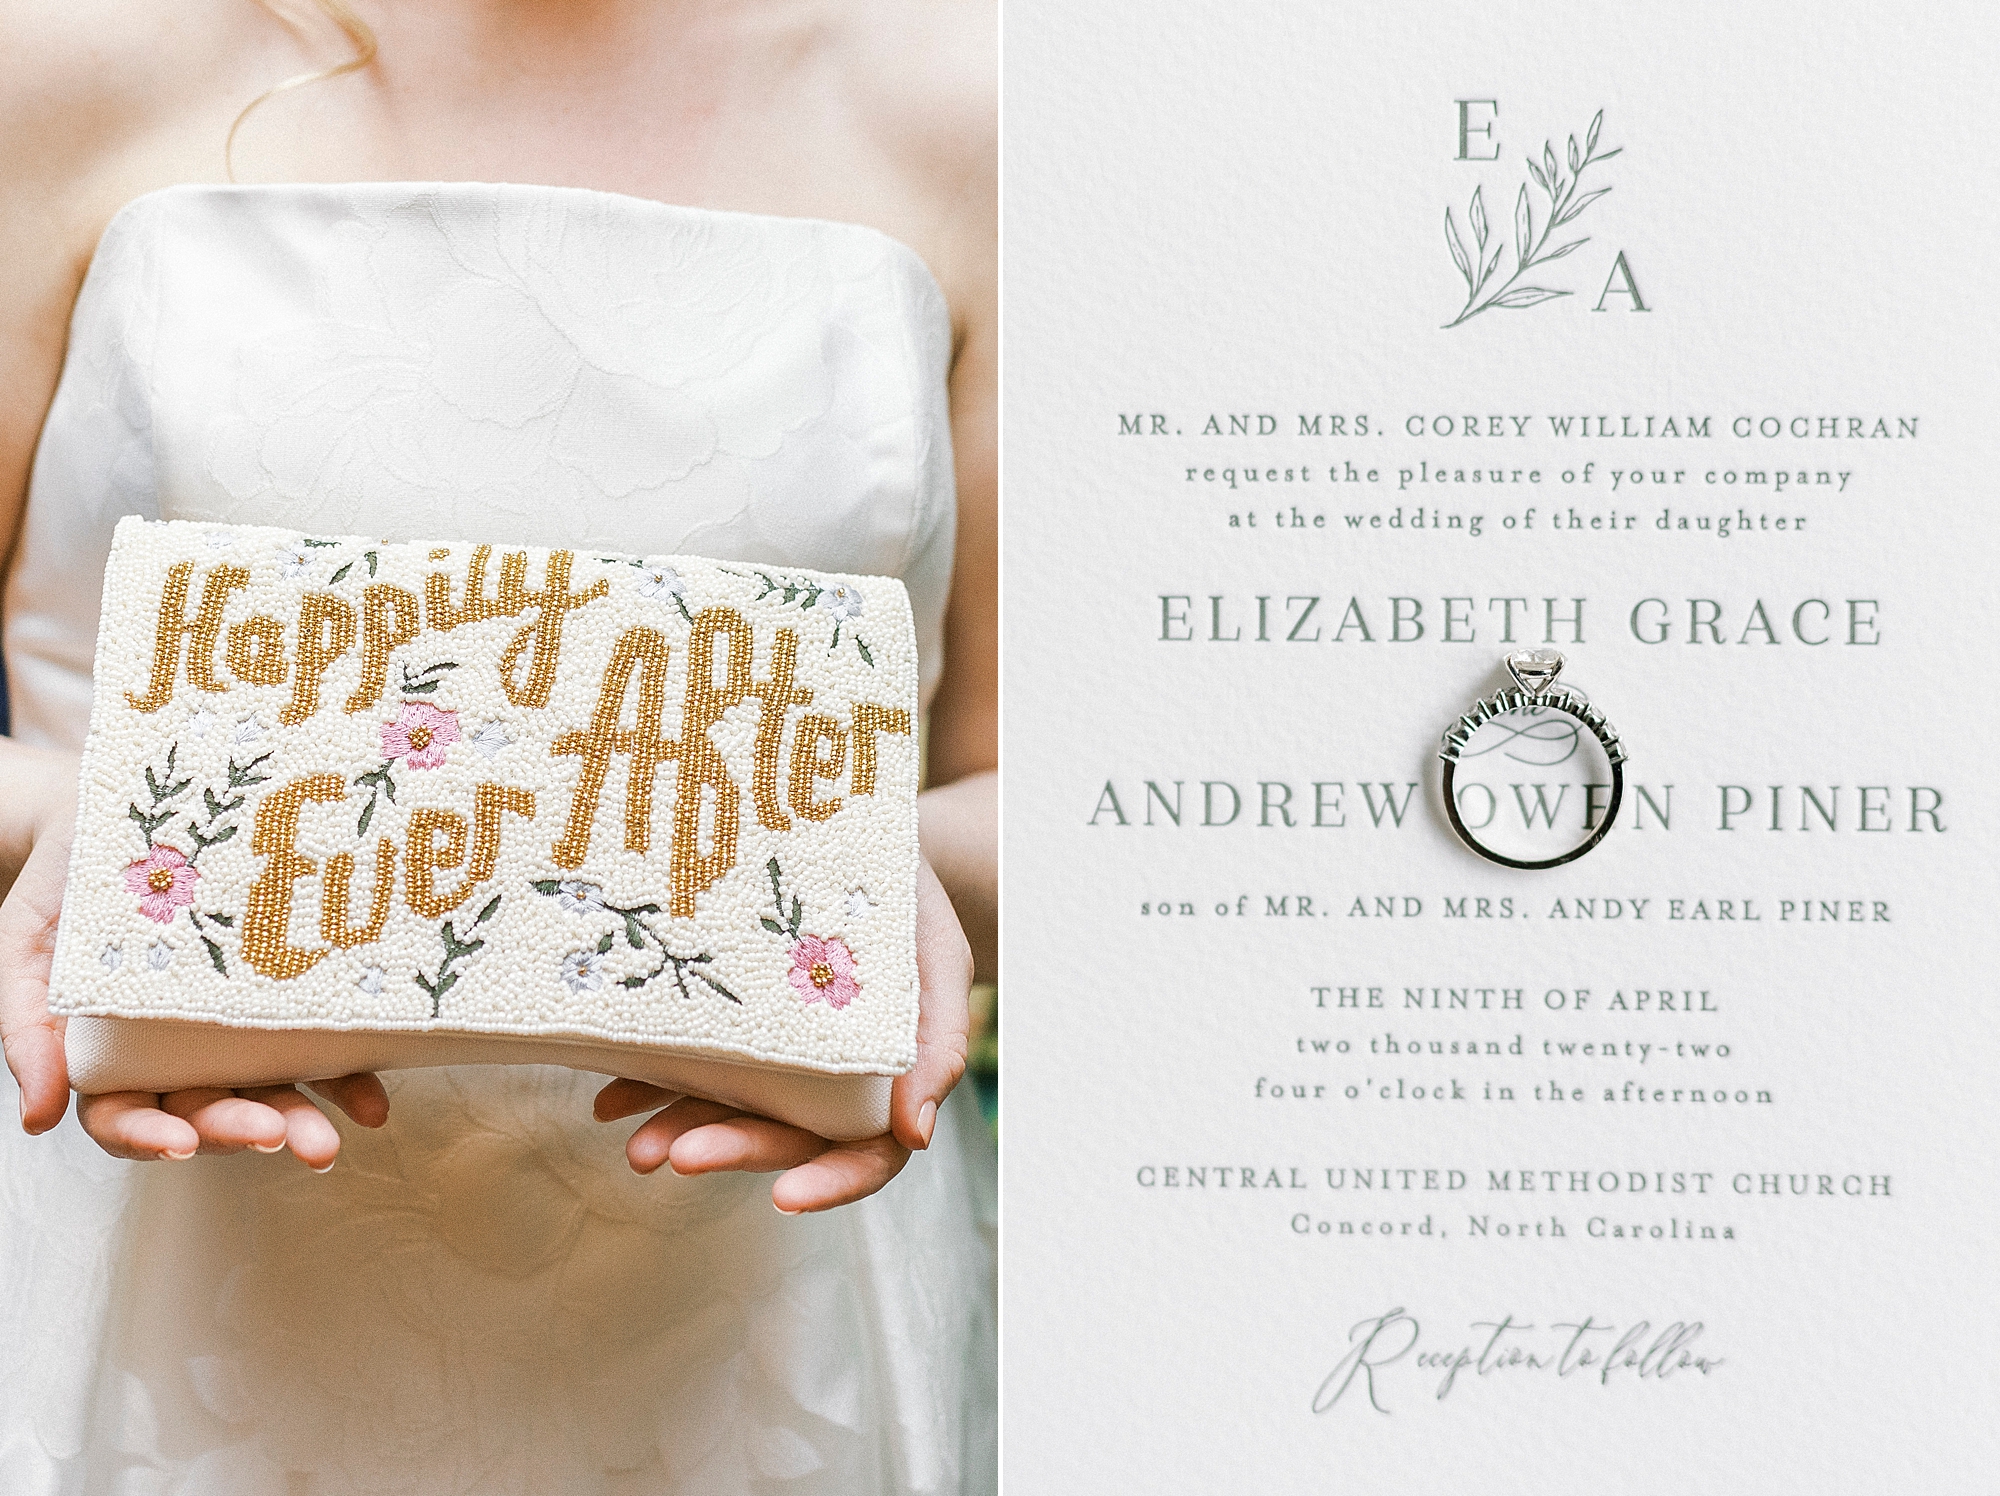 bride holds box that says "happily ever after"